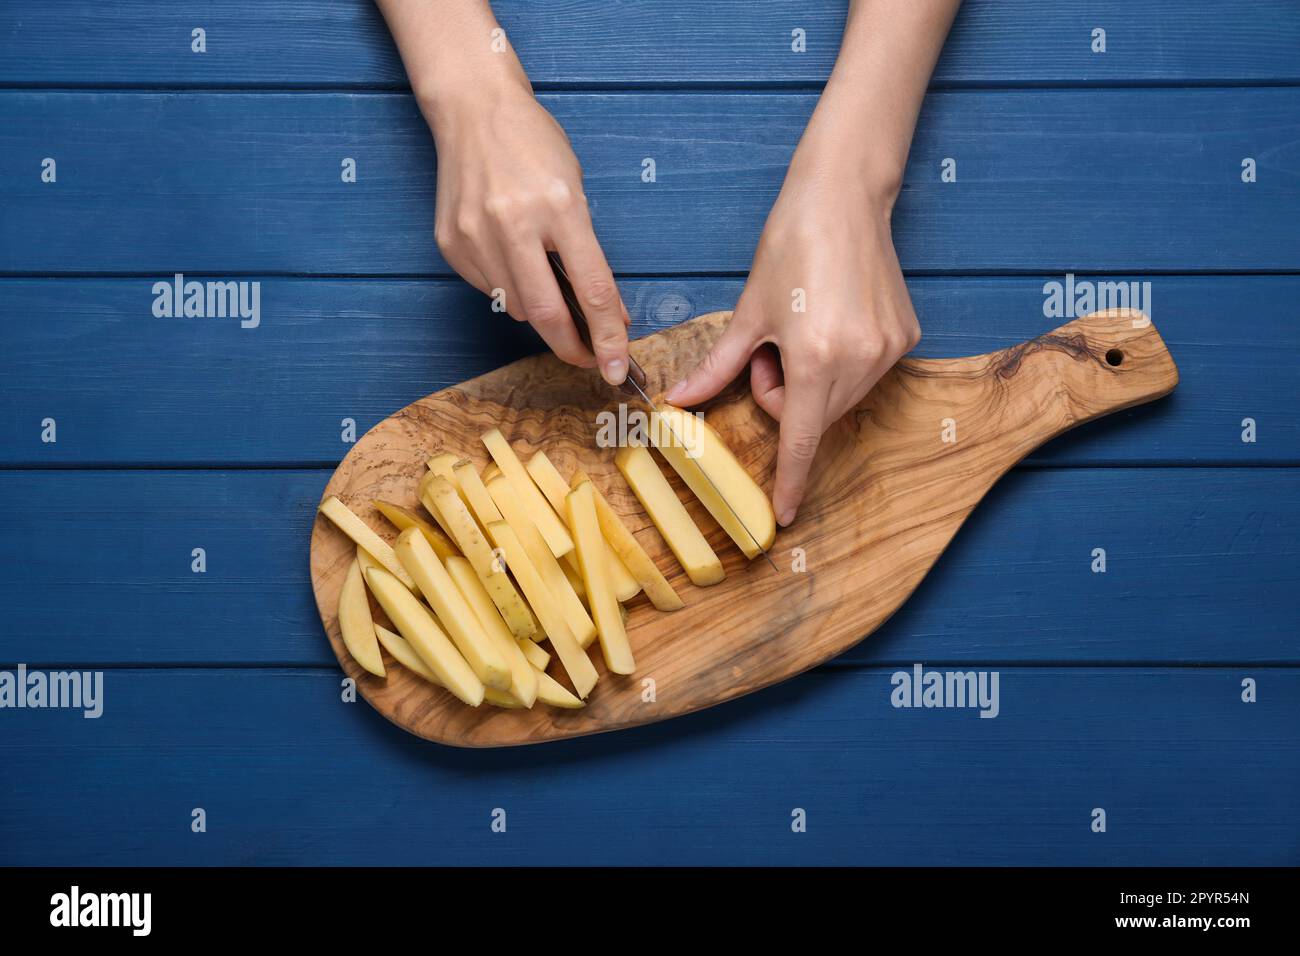 https://c8.alamy.com/comp/2PYR54N/woman-cutting-potato-at-blue-wooden-table-top-view-cooking-delicious-french-fries-2PYR54N.jpg